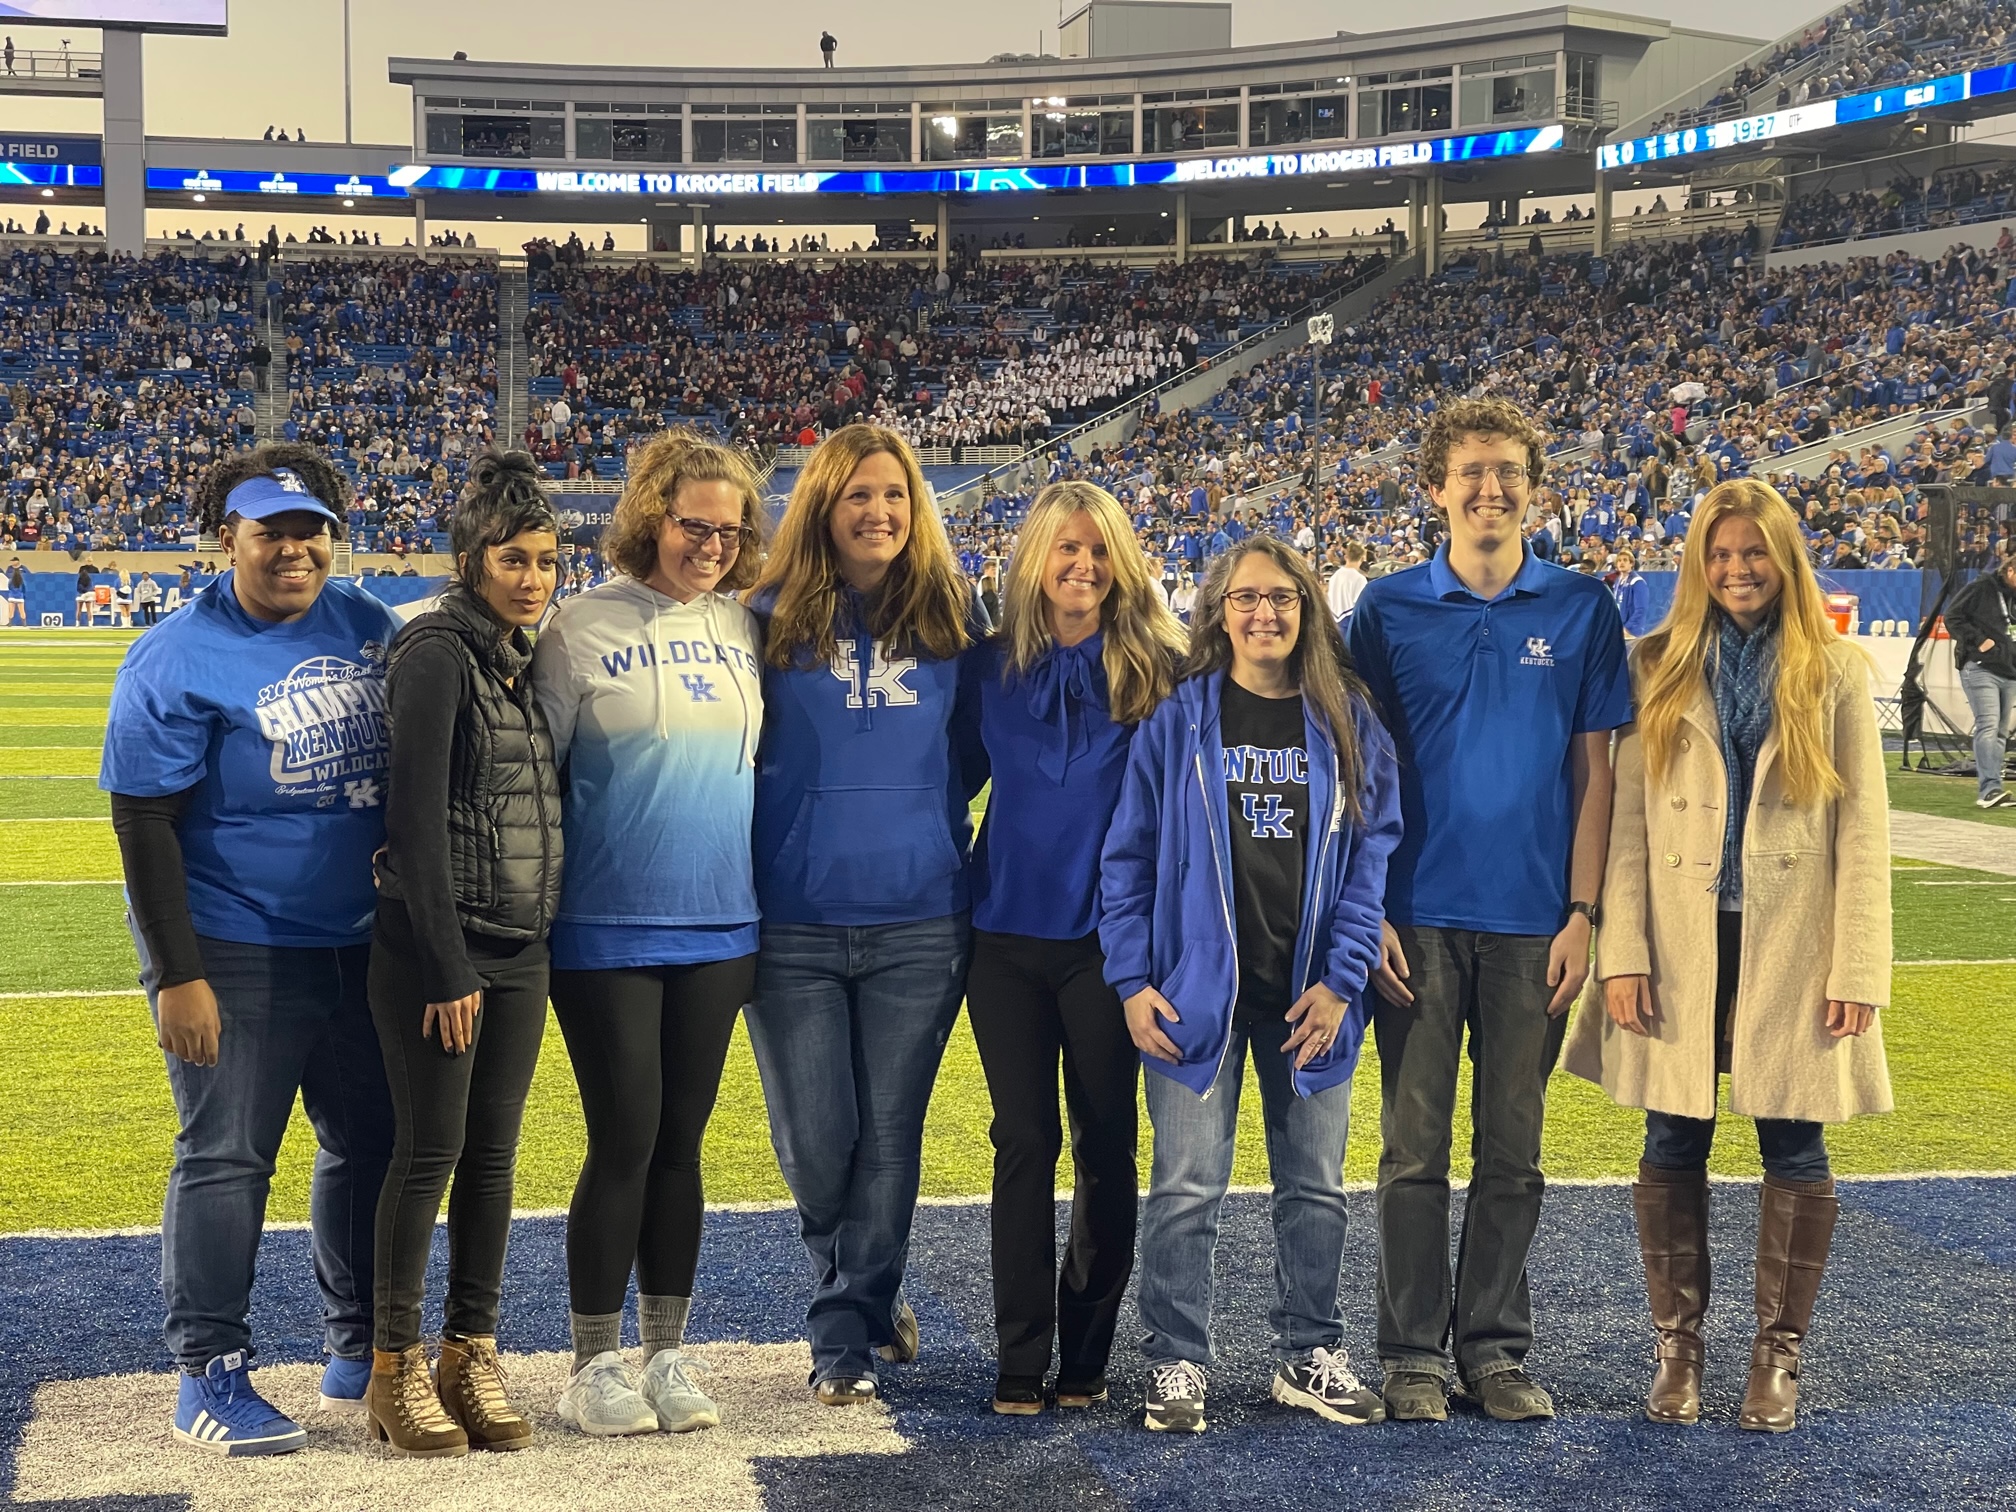 Outstanding Faculty Awards 2022 honored on the field at Kroger Stadium